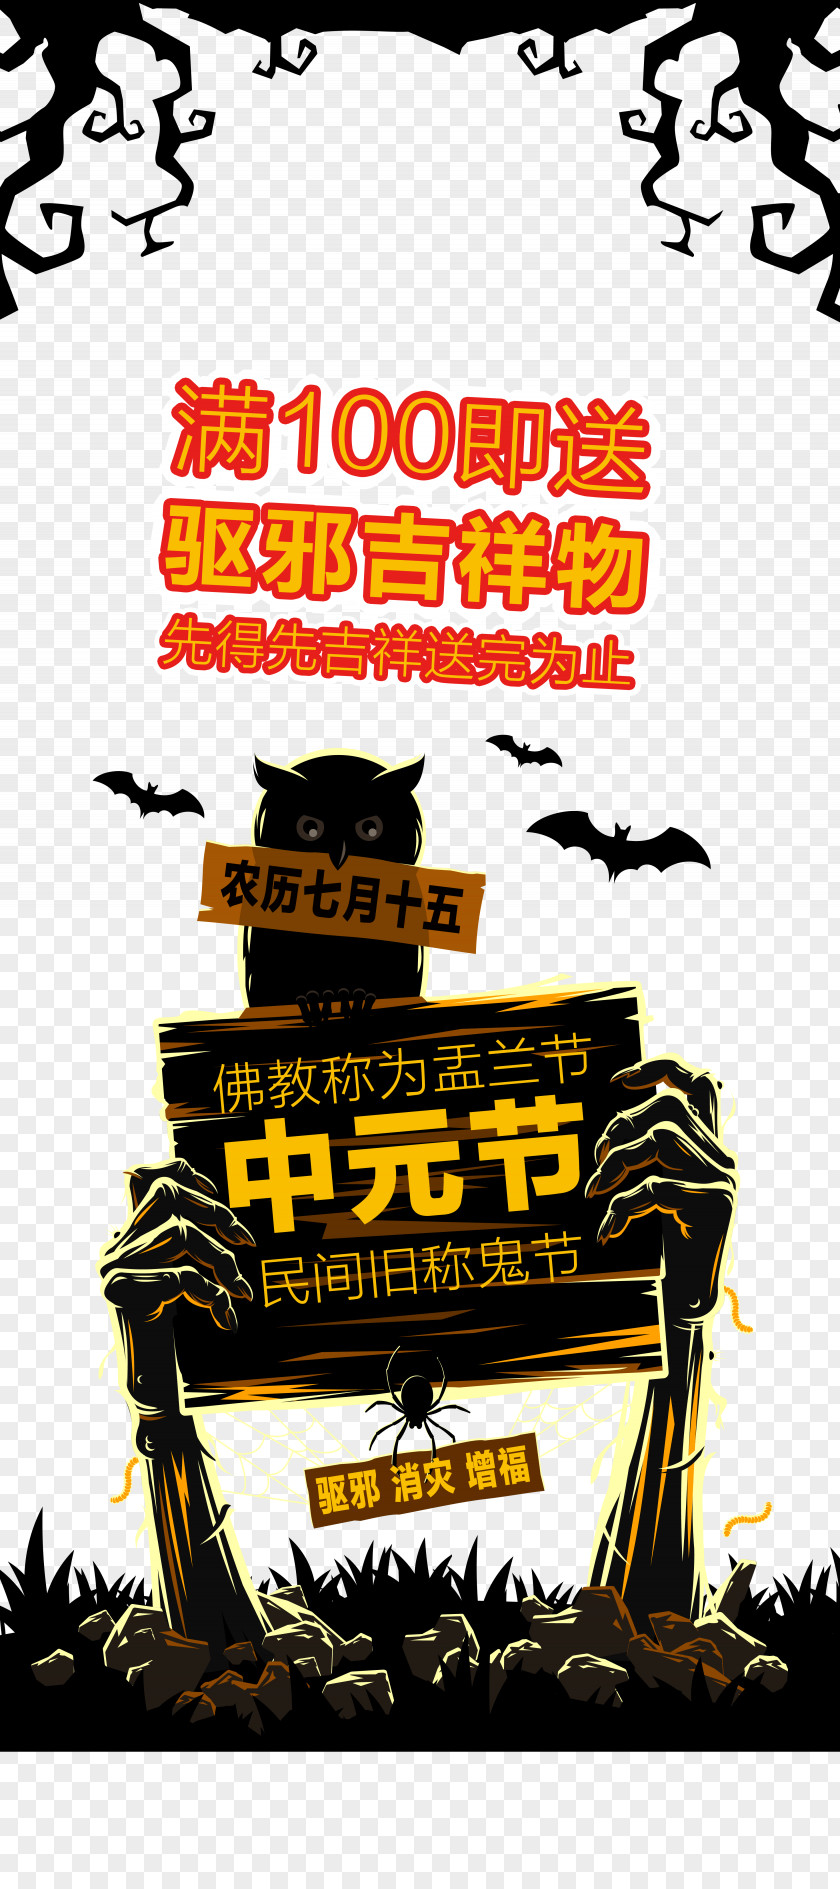 Hungry Ghost Festival Poster PNG